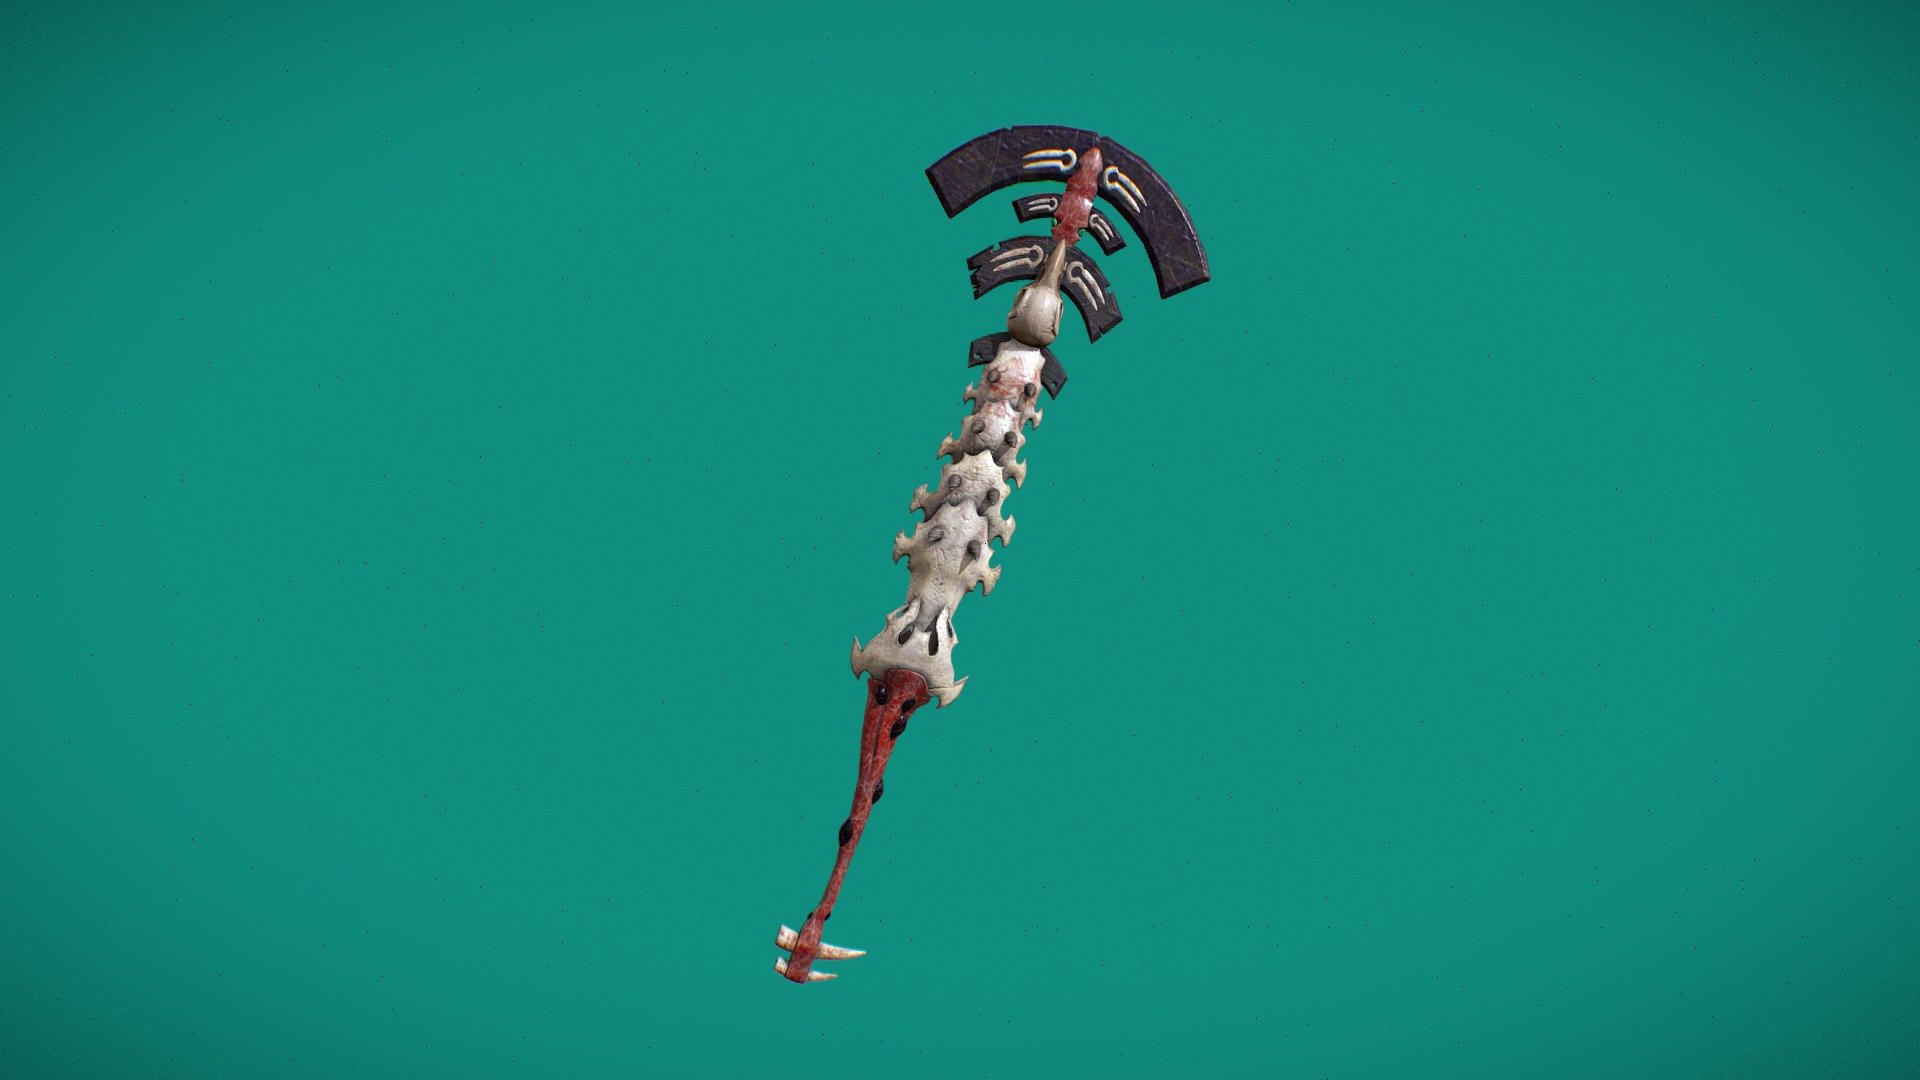 An Axe-like one-handed weapon, made of redstone and obsidian bones.
Based on the concept art of: Marine Coiffard (https://www.artstation.com/artwork/Rg9Ke)
Made in blender and textured in substance painter 3d model